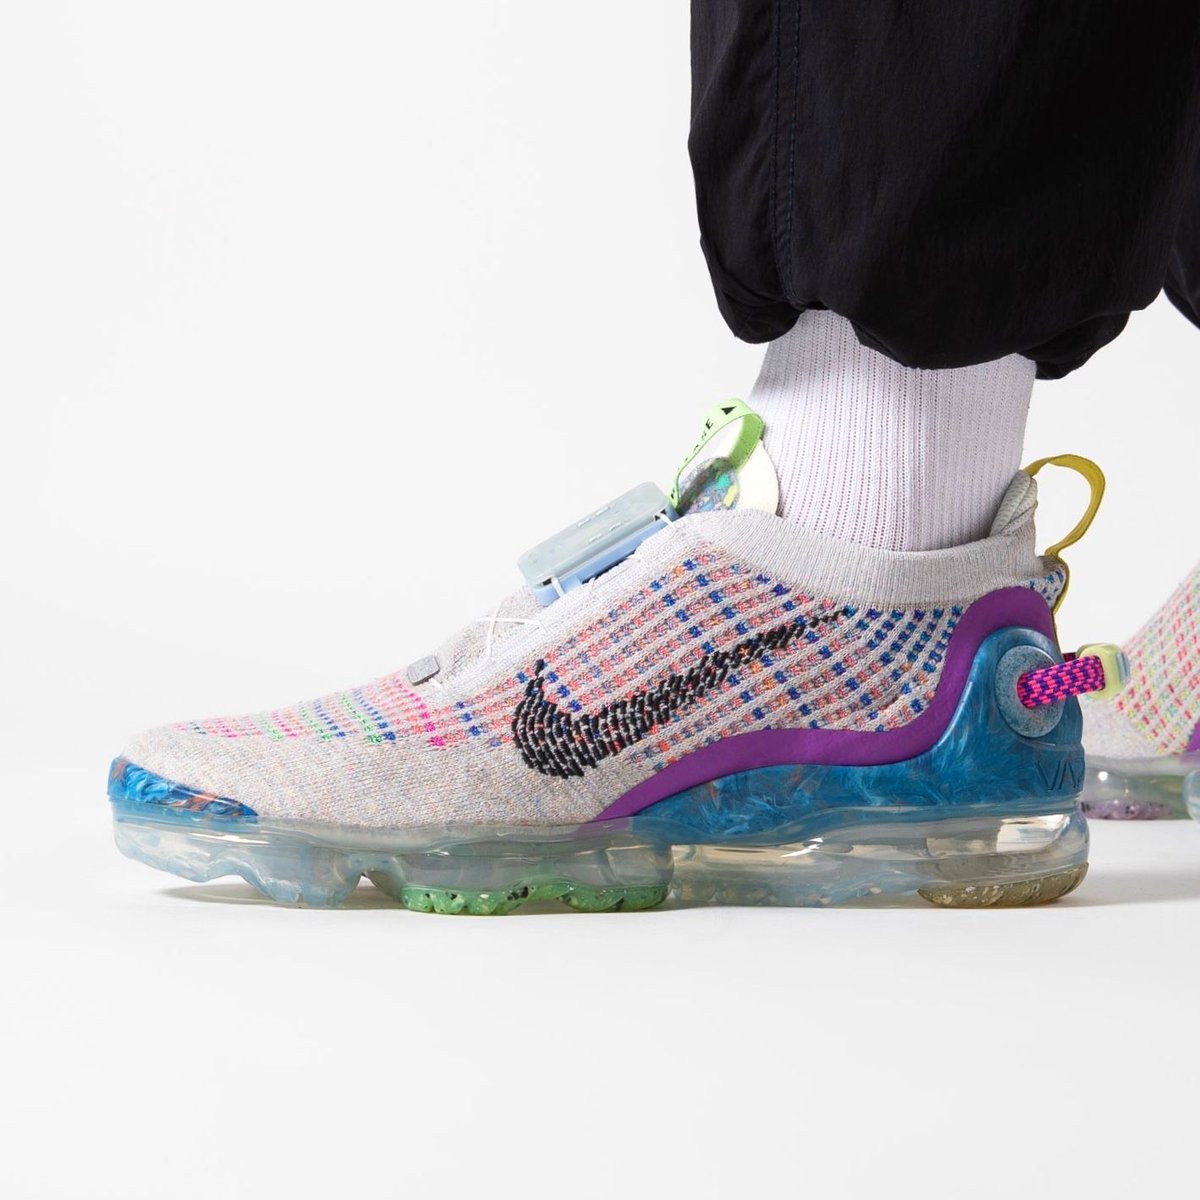 2020 Sales on Nike Air Vapormax Plus Running Shoes